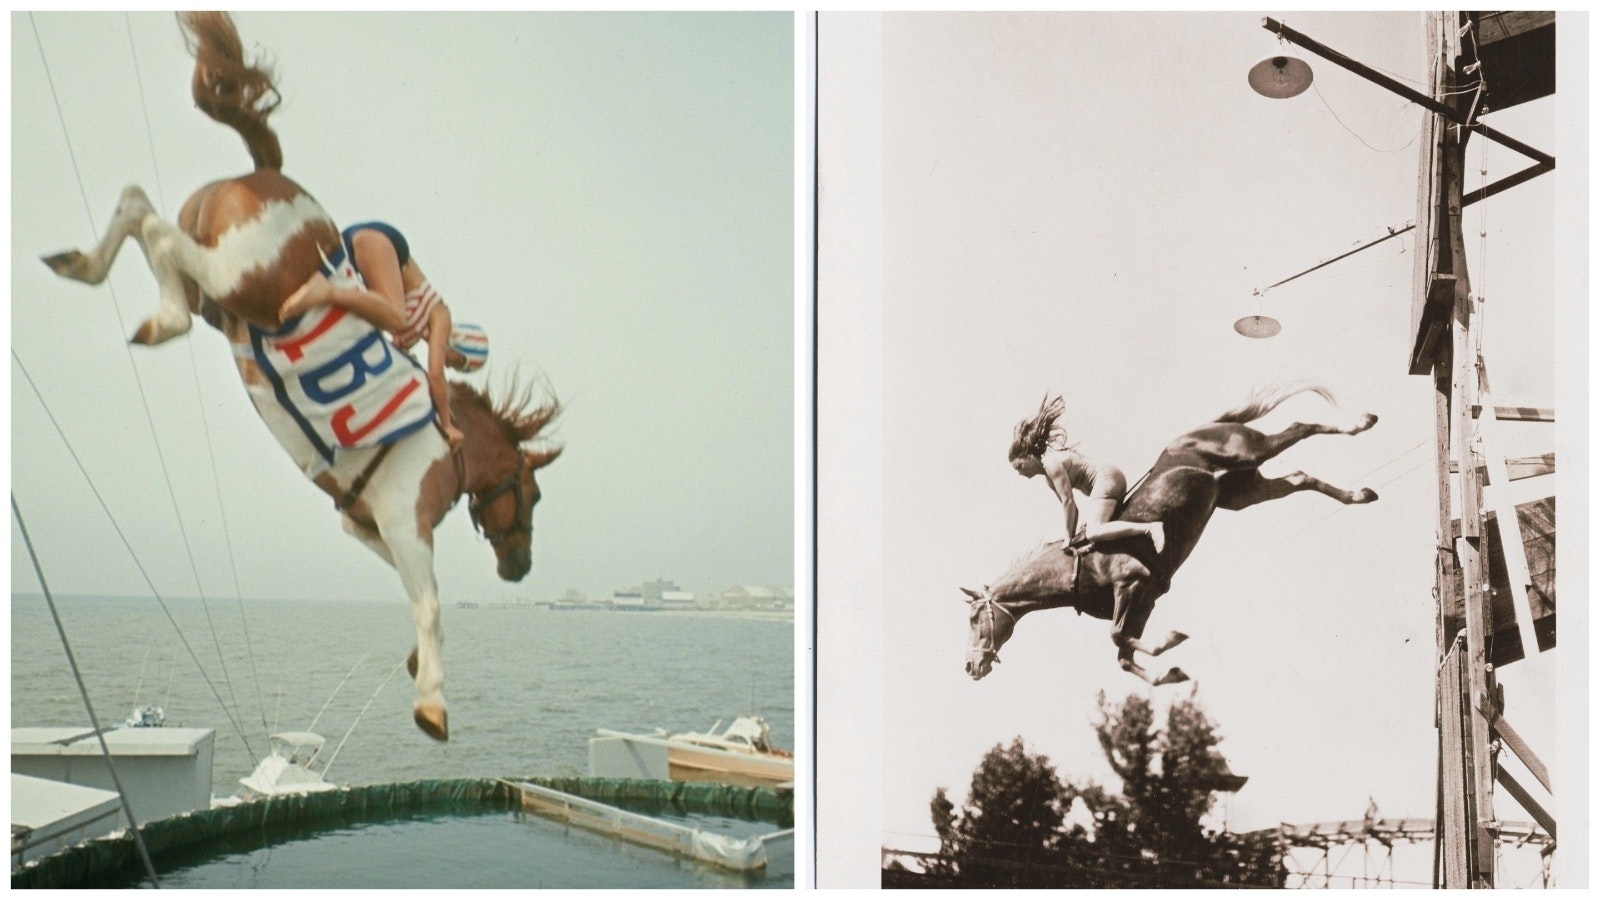 Horse diving into the water at Atlantic City, left. At right, “This is me on Klatawah in St. Joe, Mo. about 10 years ago. Lorena,” was written on the backside of this undated photo.